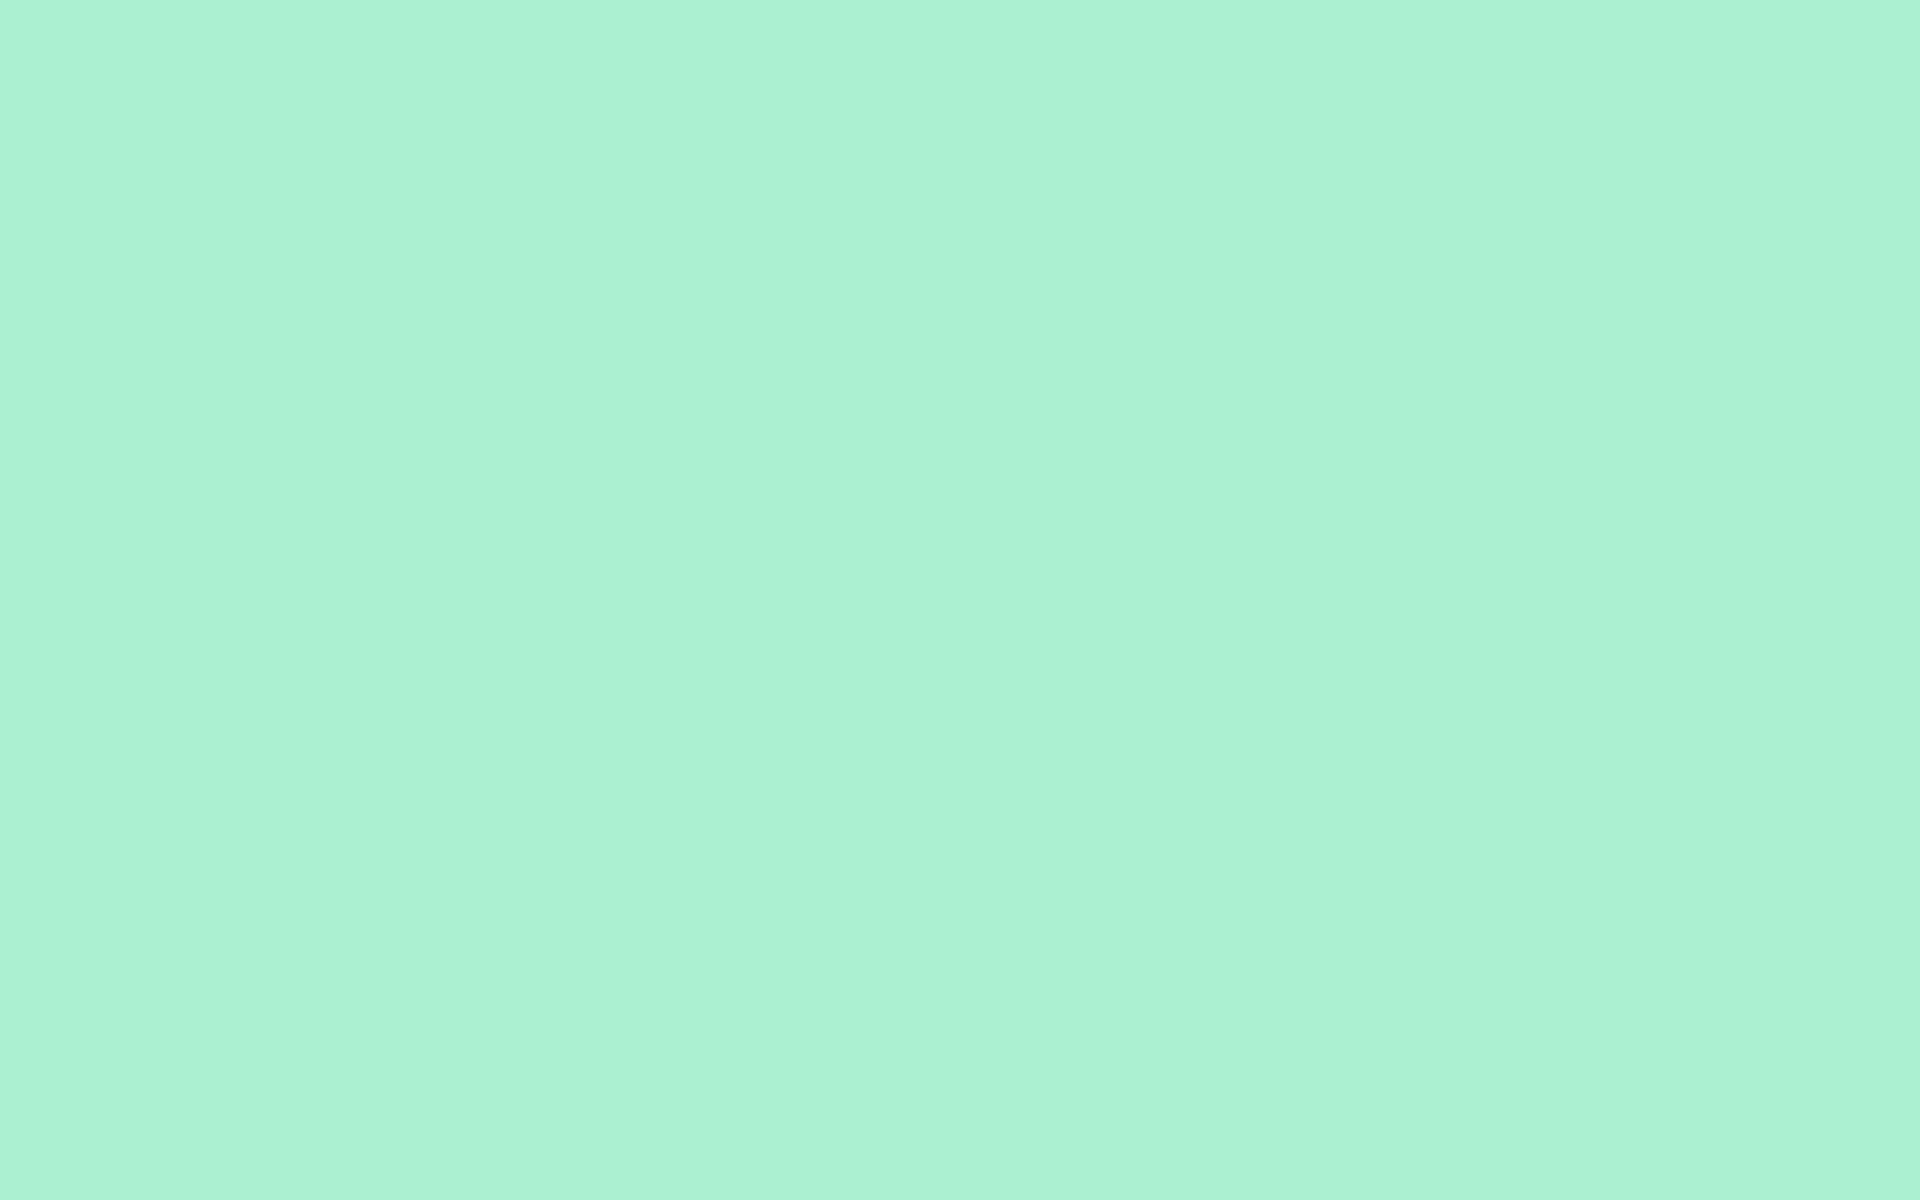 Tranquil Plain Green Background